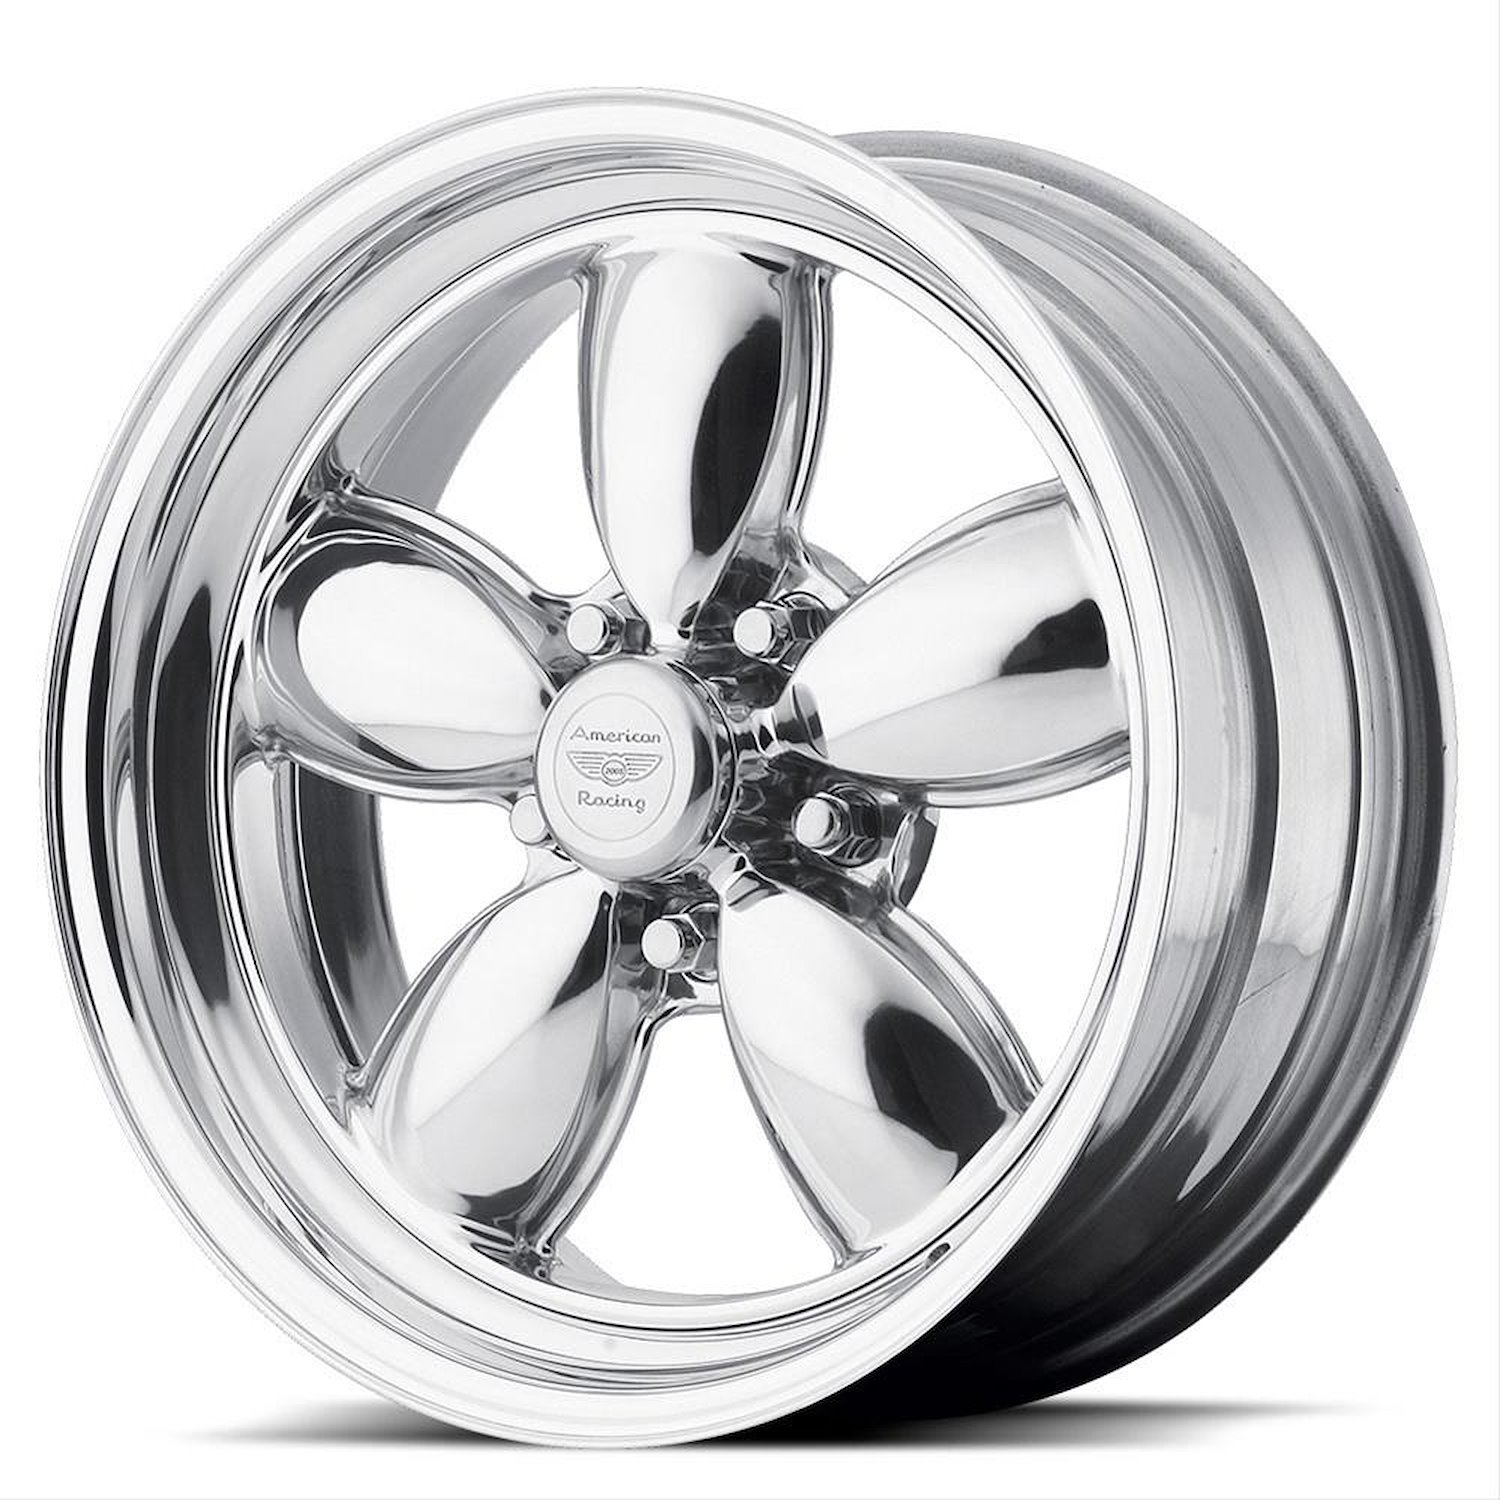 AMERICAN RACING CLASSIC 200S TWO-PIECE POLISHED 17 x 8 5X4.75 6 4.74